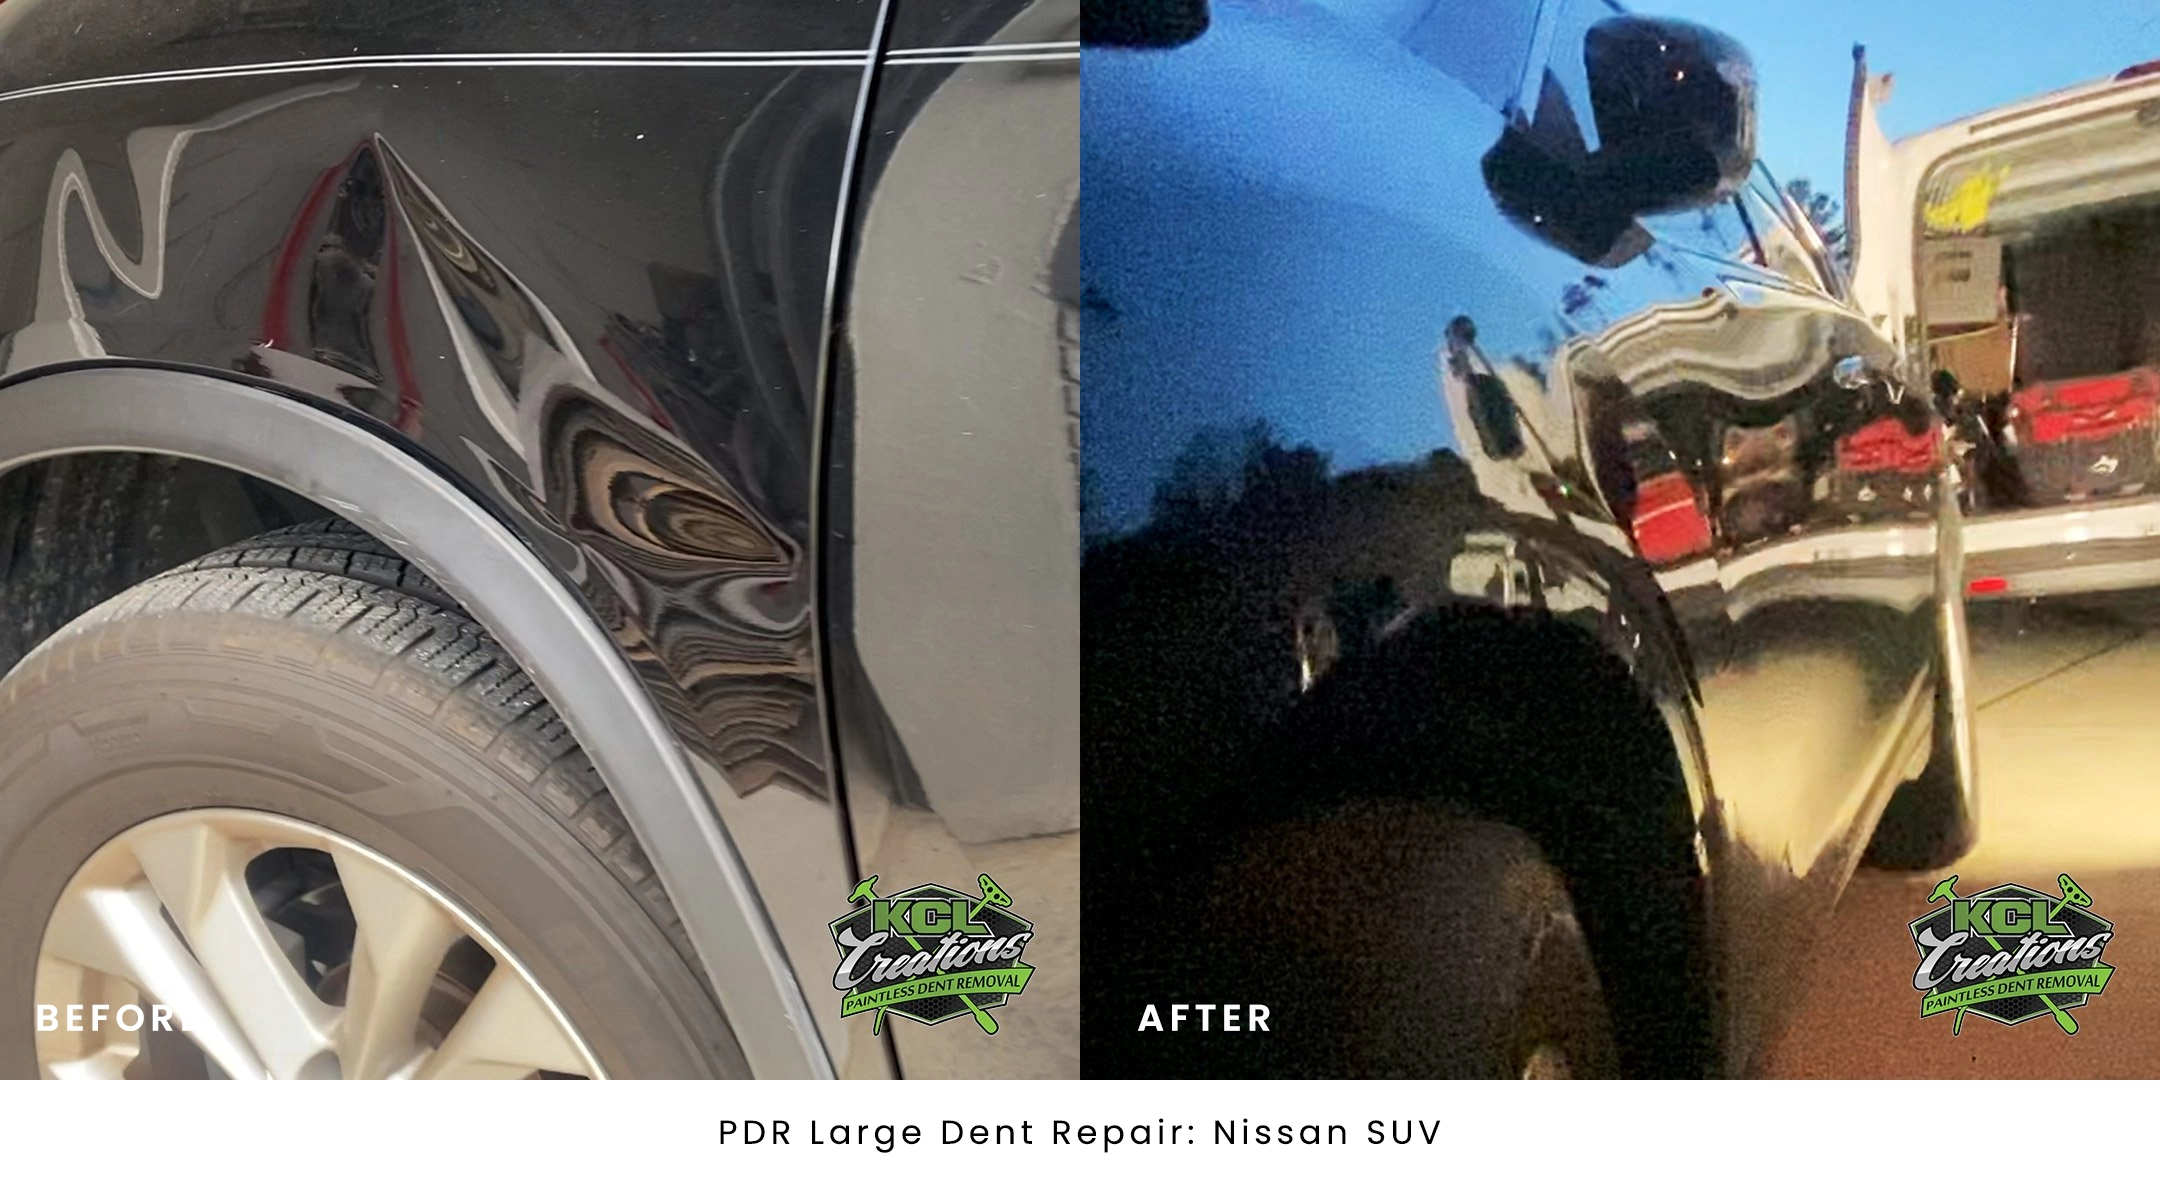 PDR Large Dent Repair Nissan SUV copy